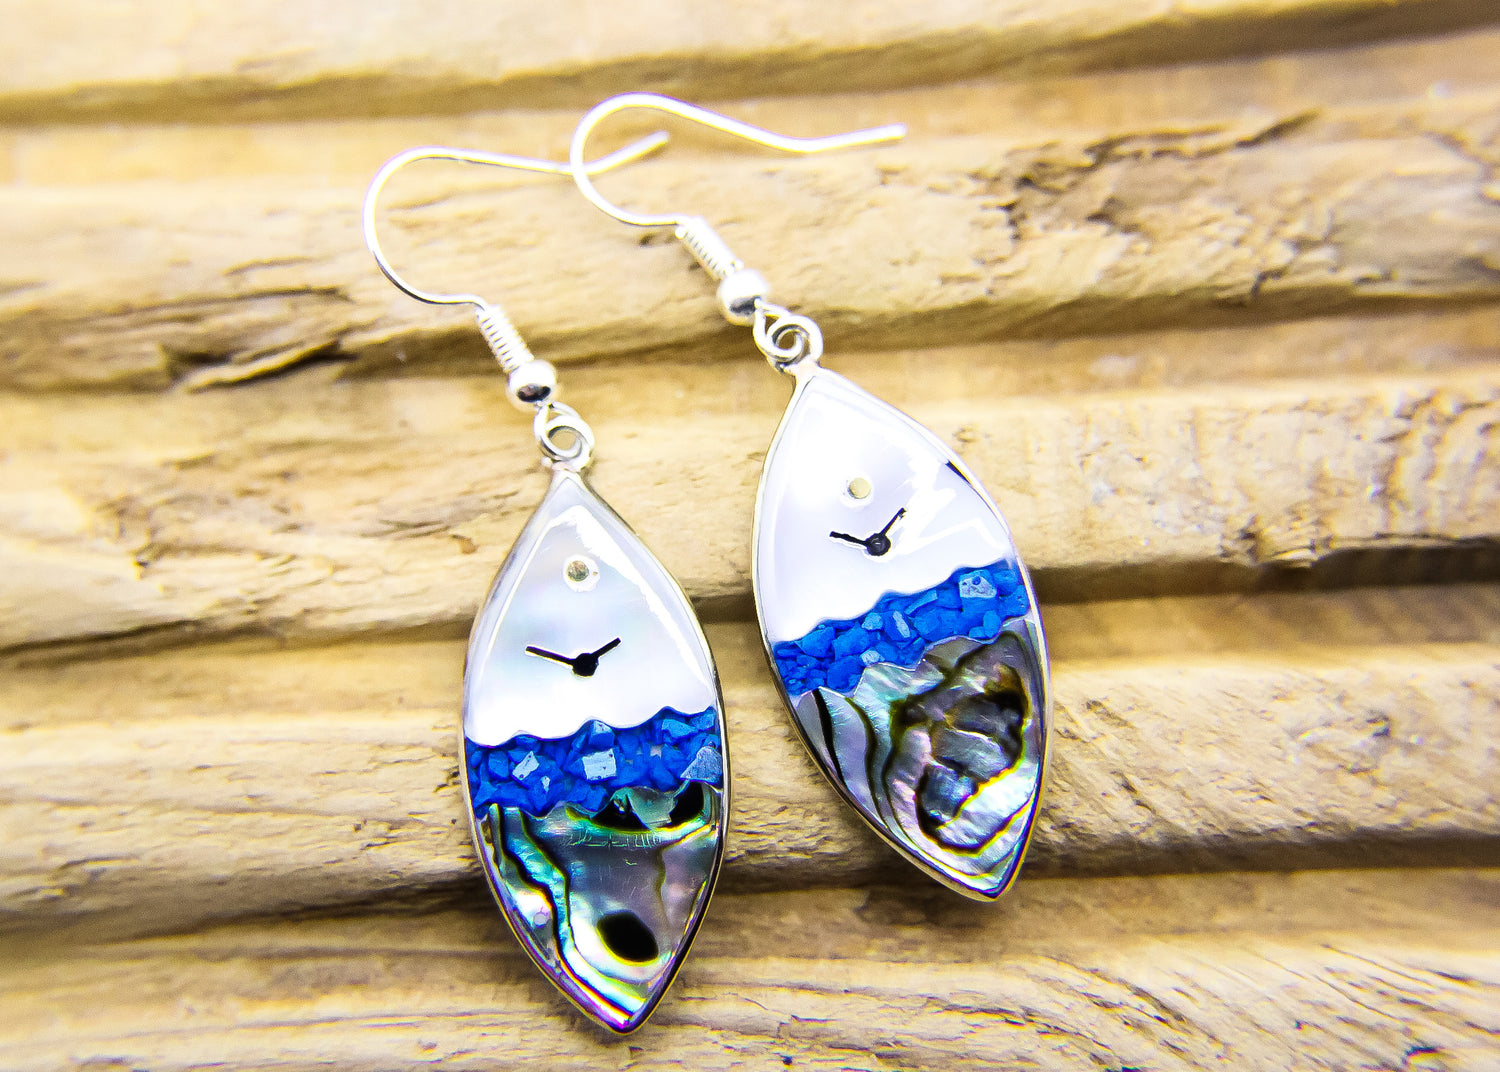 Oval shaped drop earrings featuring an ocean view design.